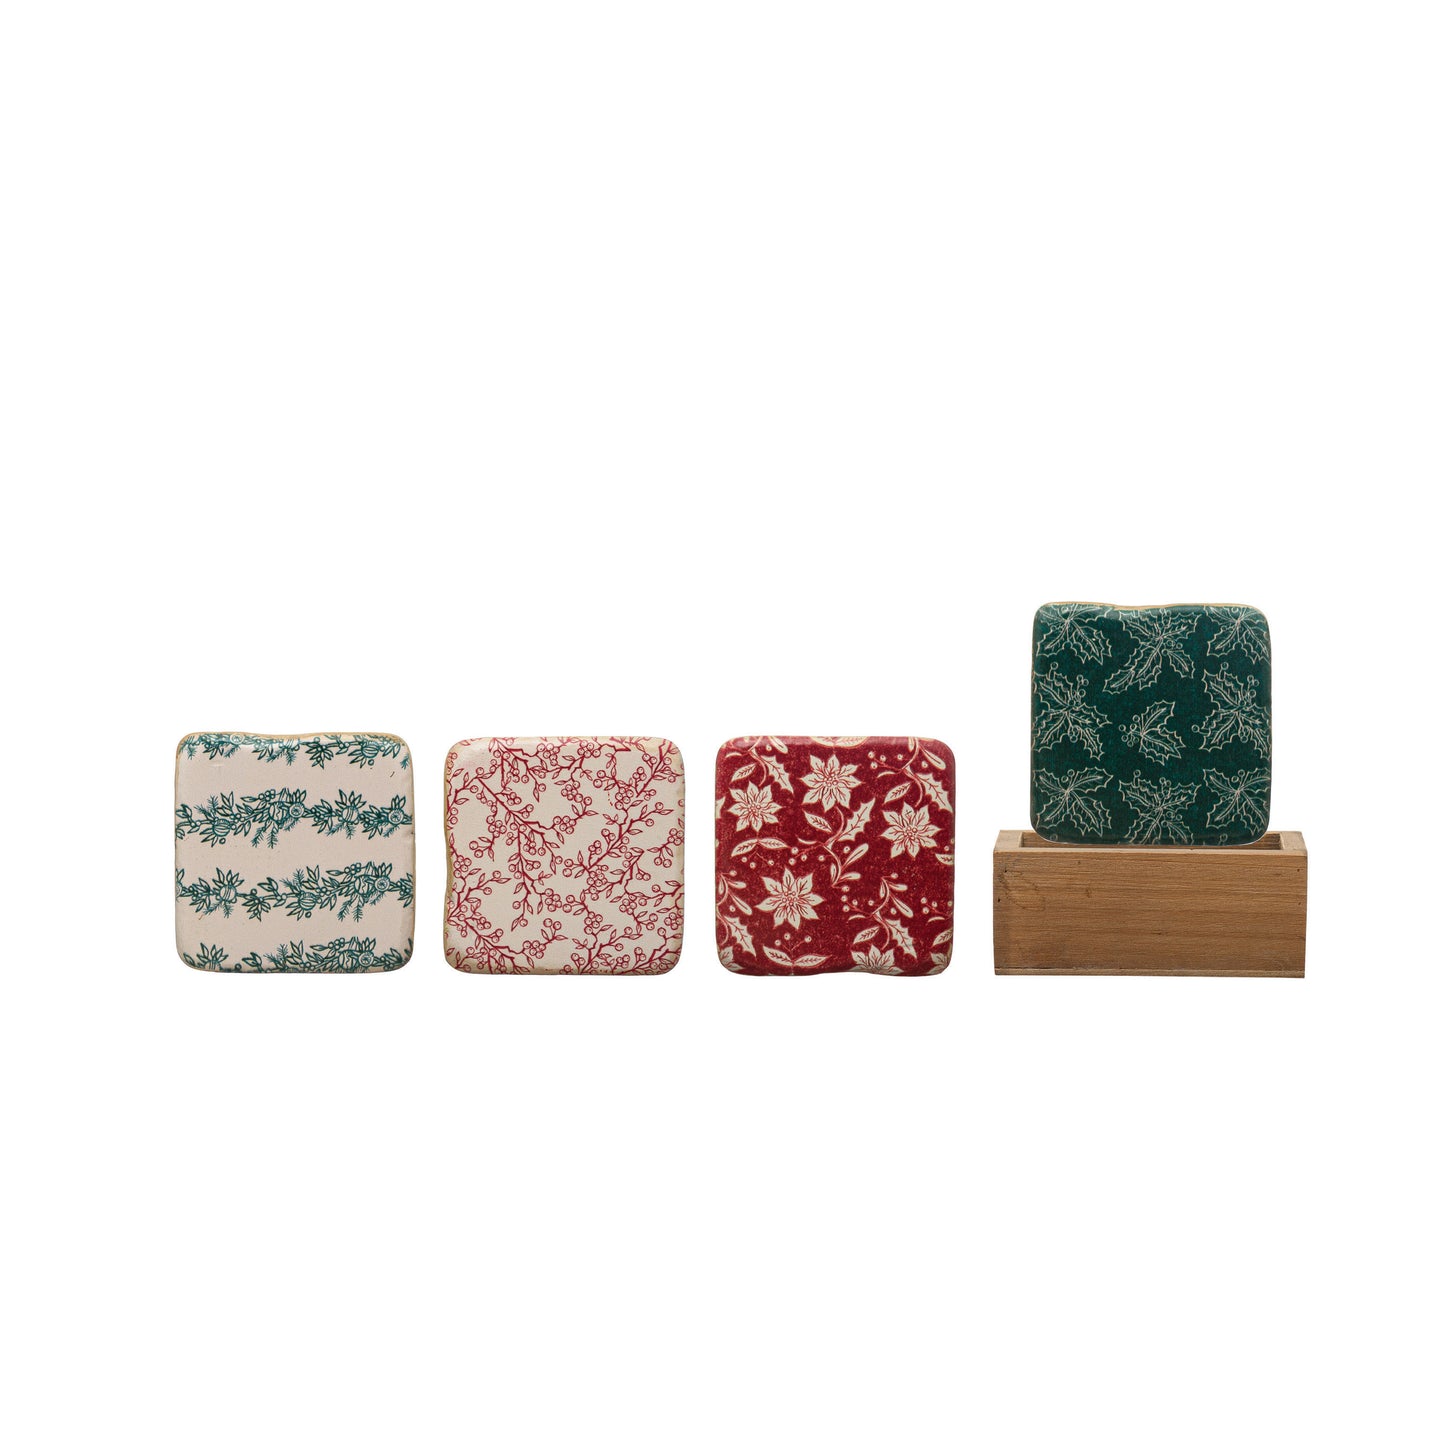 Resin Coasters in Wood Box | Set of 4 | Green and Red Berry Pattern